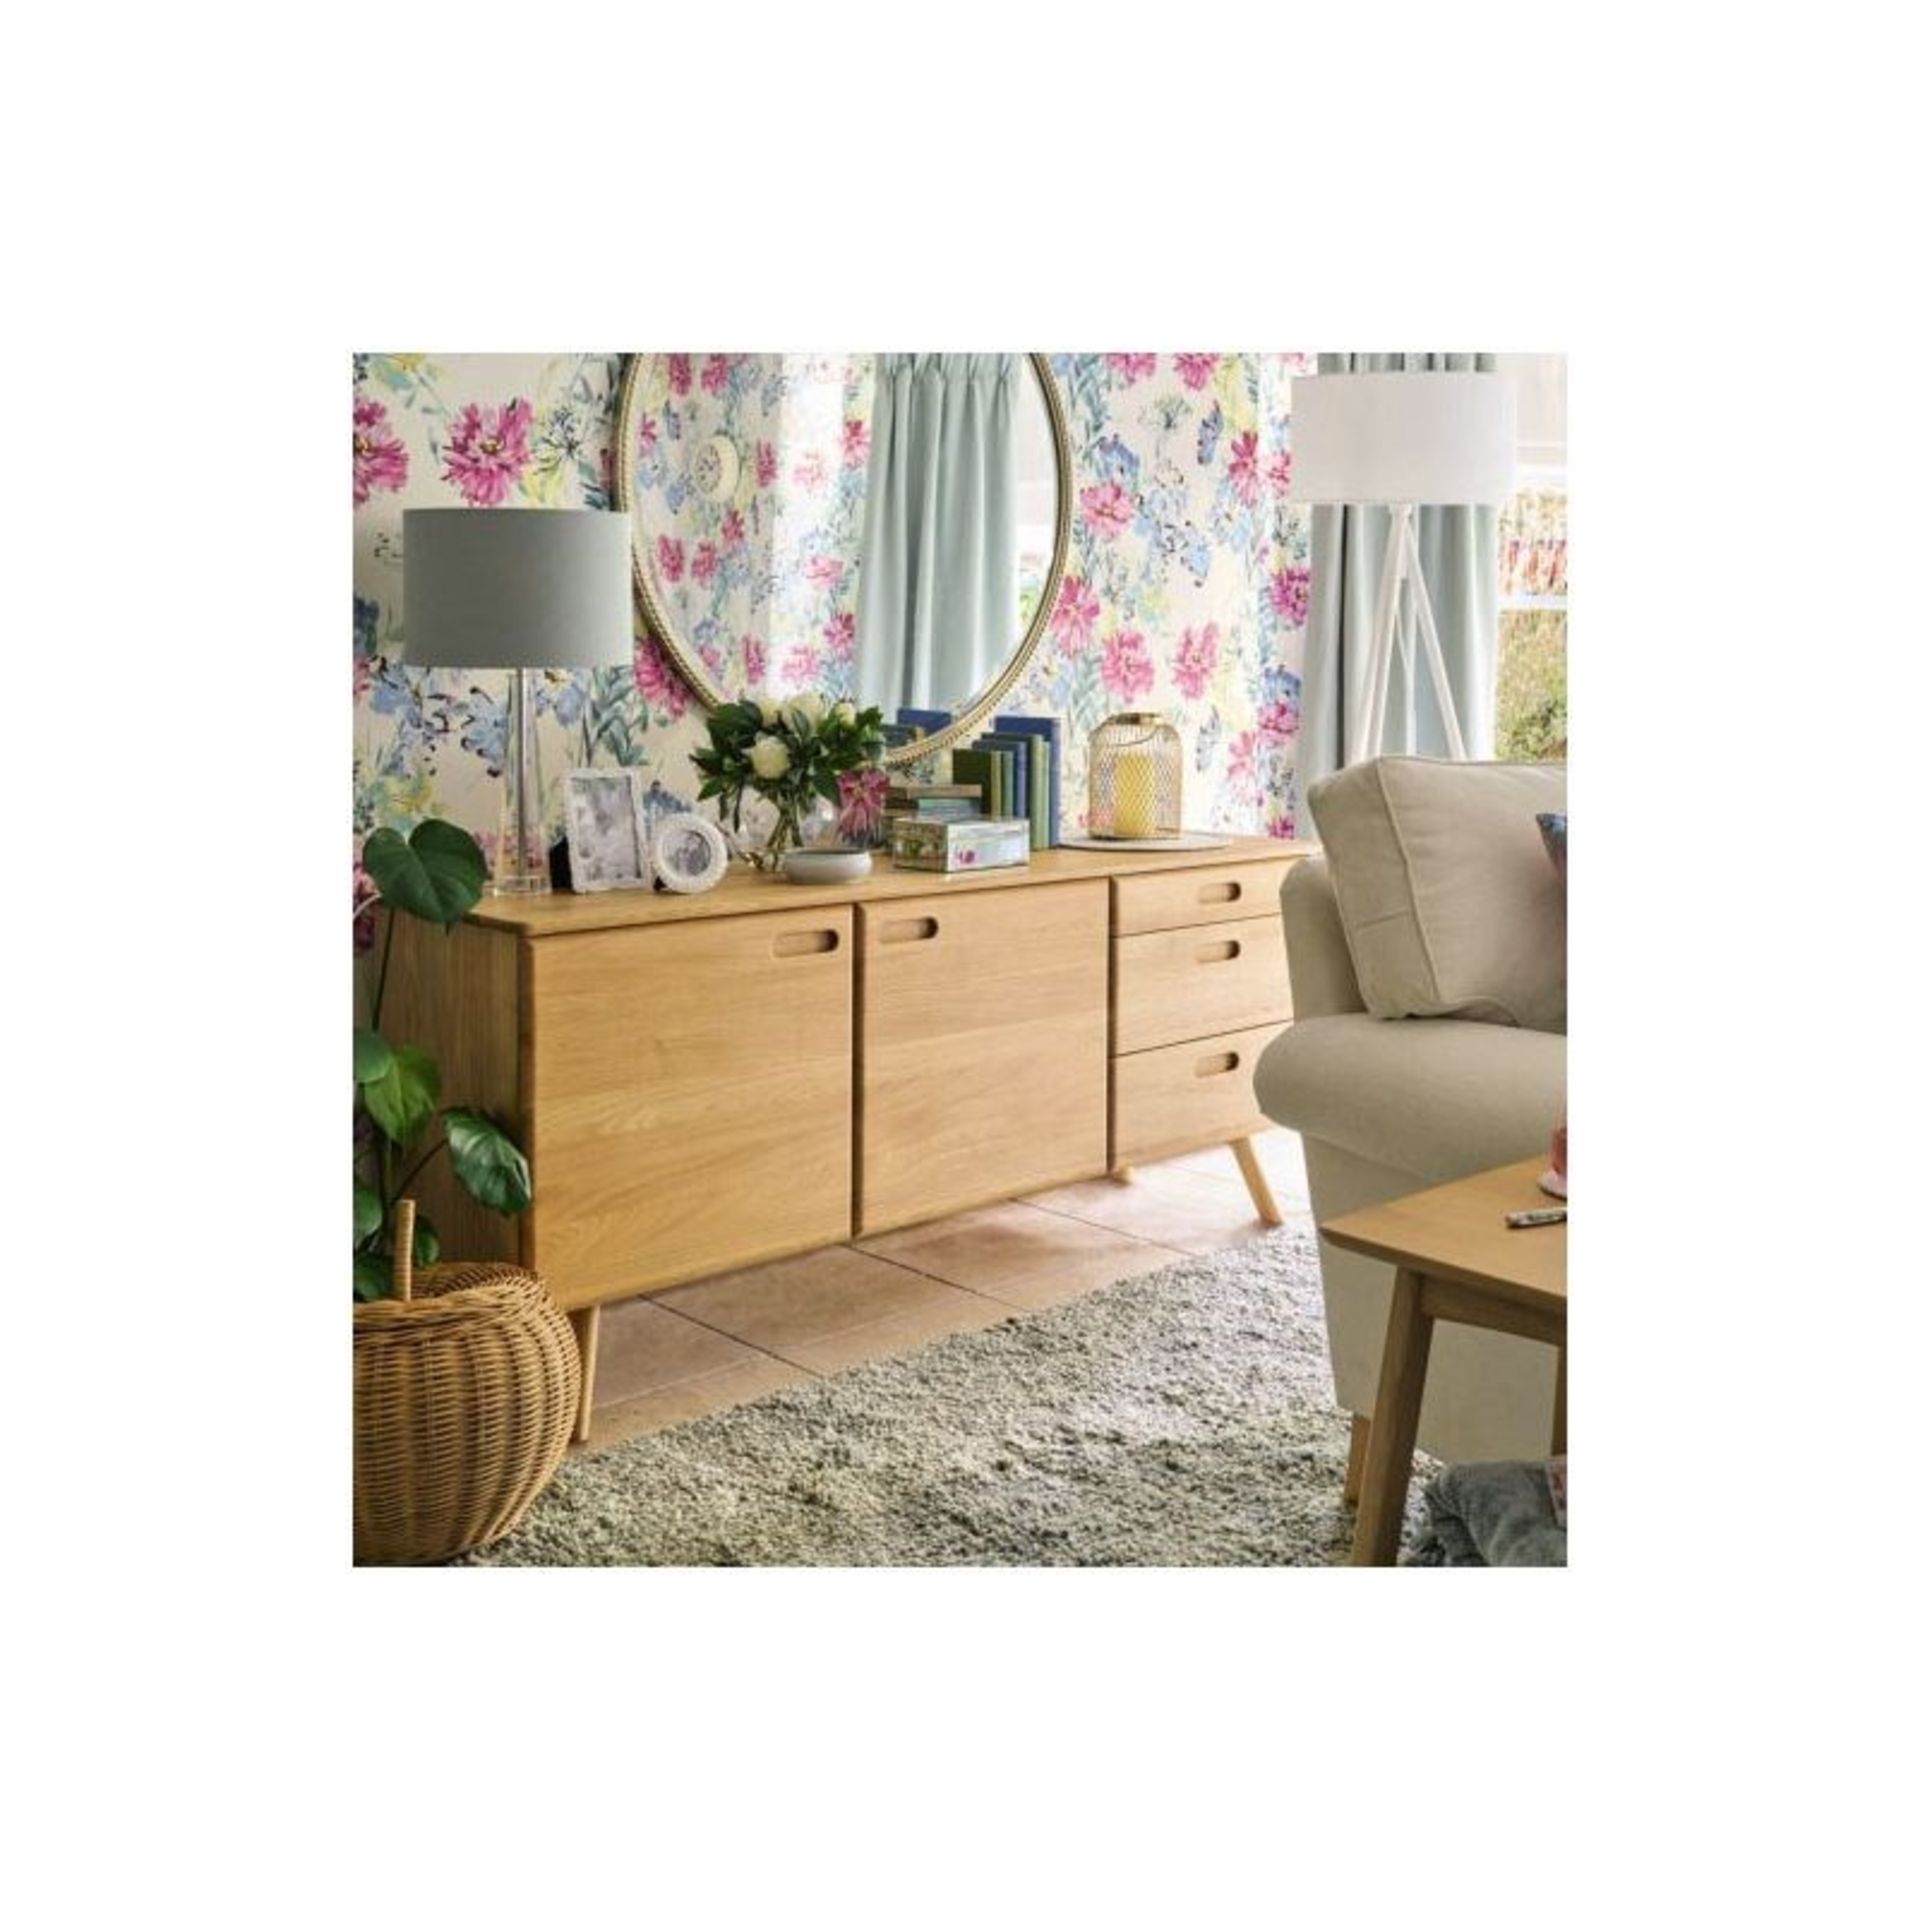 Laura Ashley Hazlemere 2 Door 3 Drawer Sideboard Taking Inspiration From The Iconic Furniture - Image 2 of 3